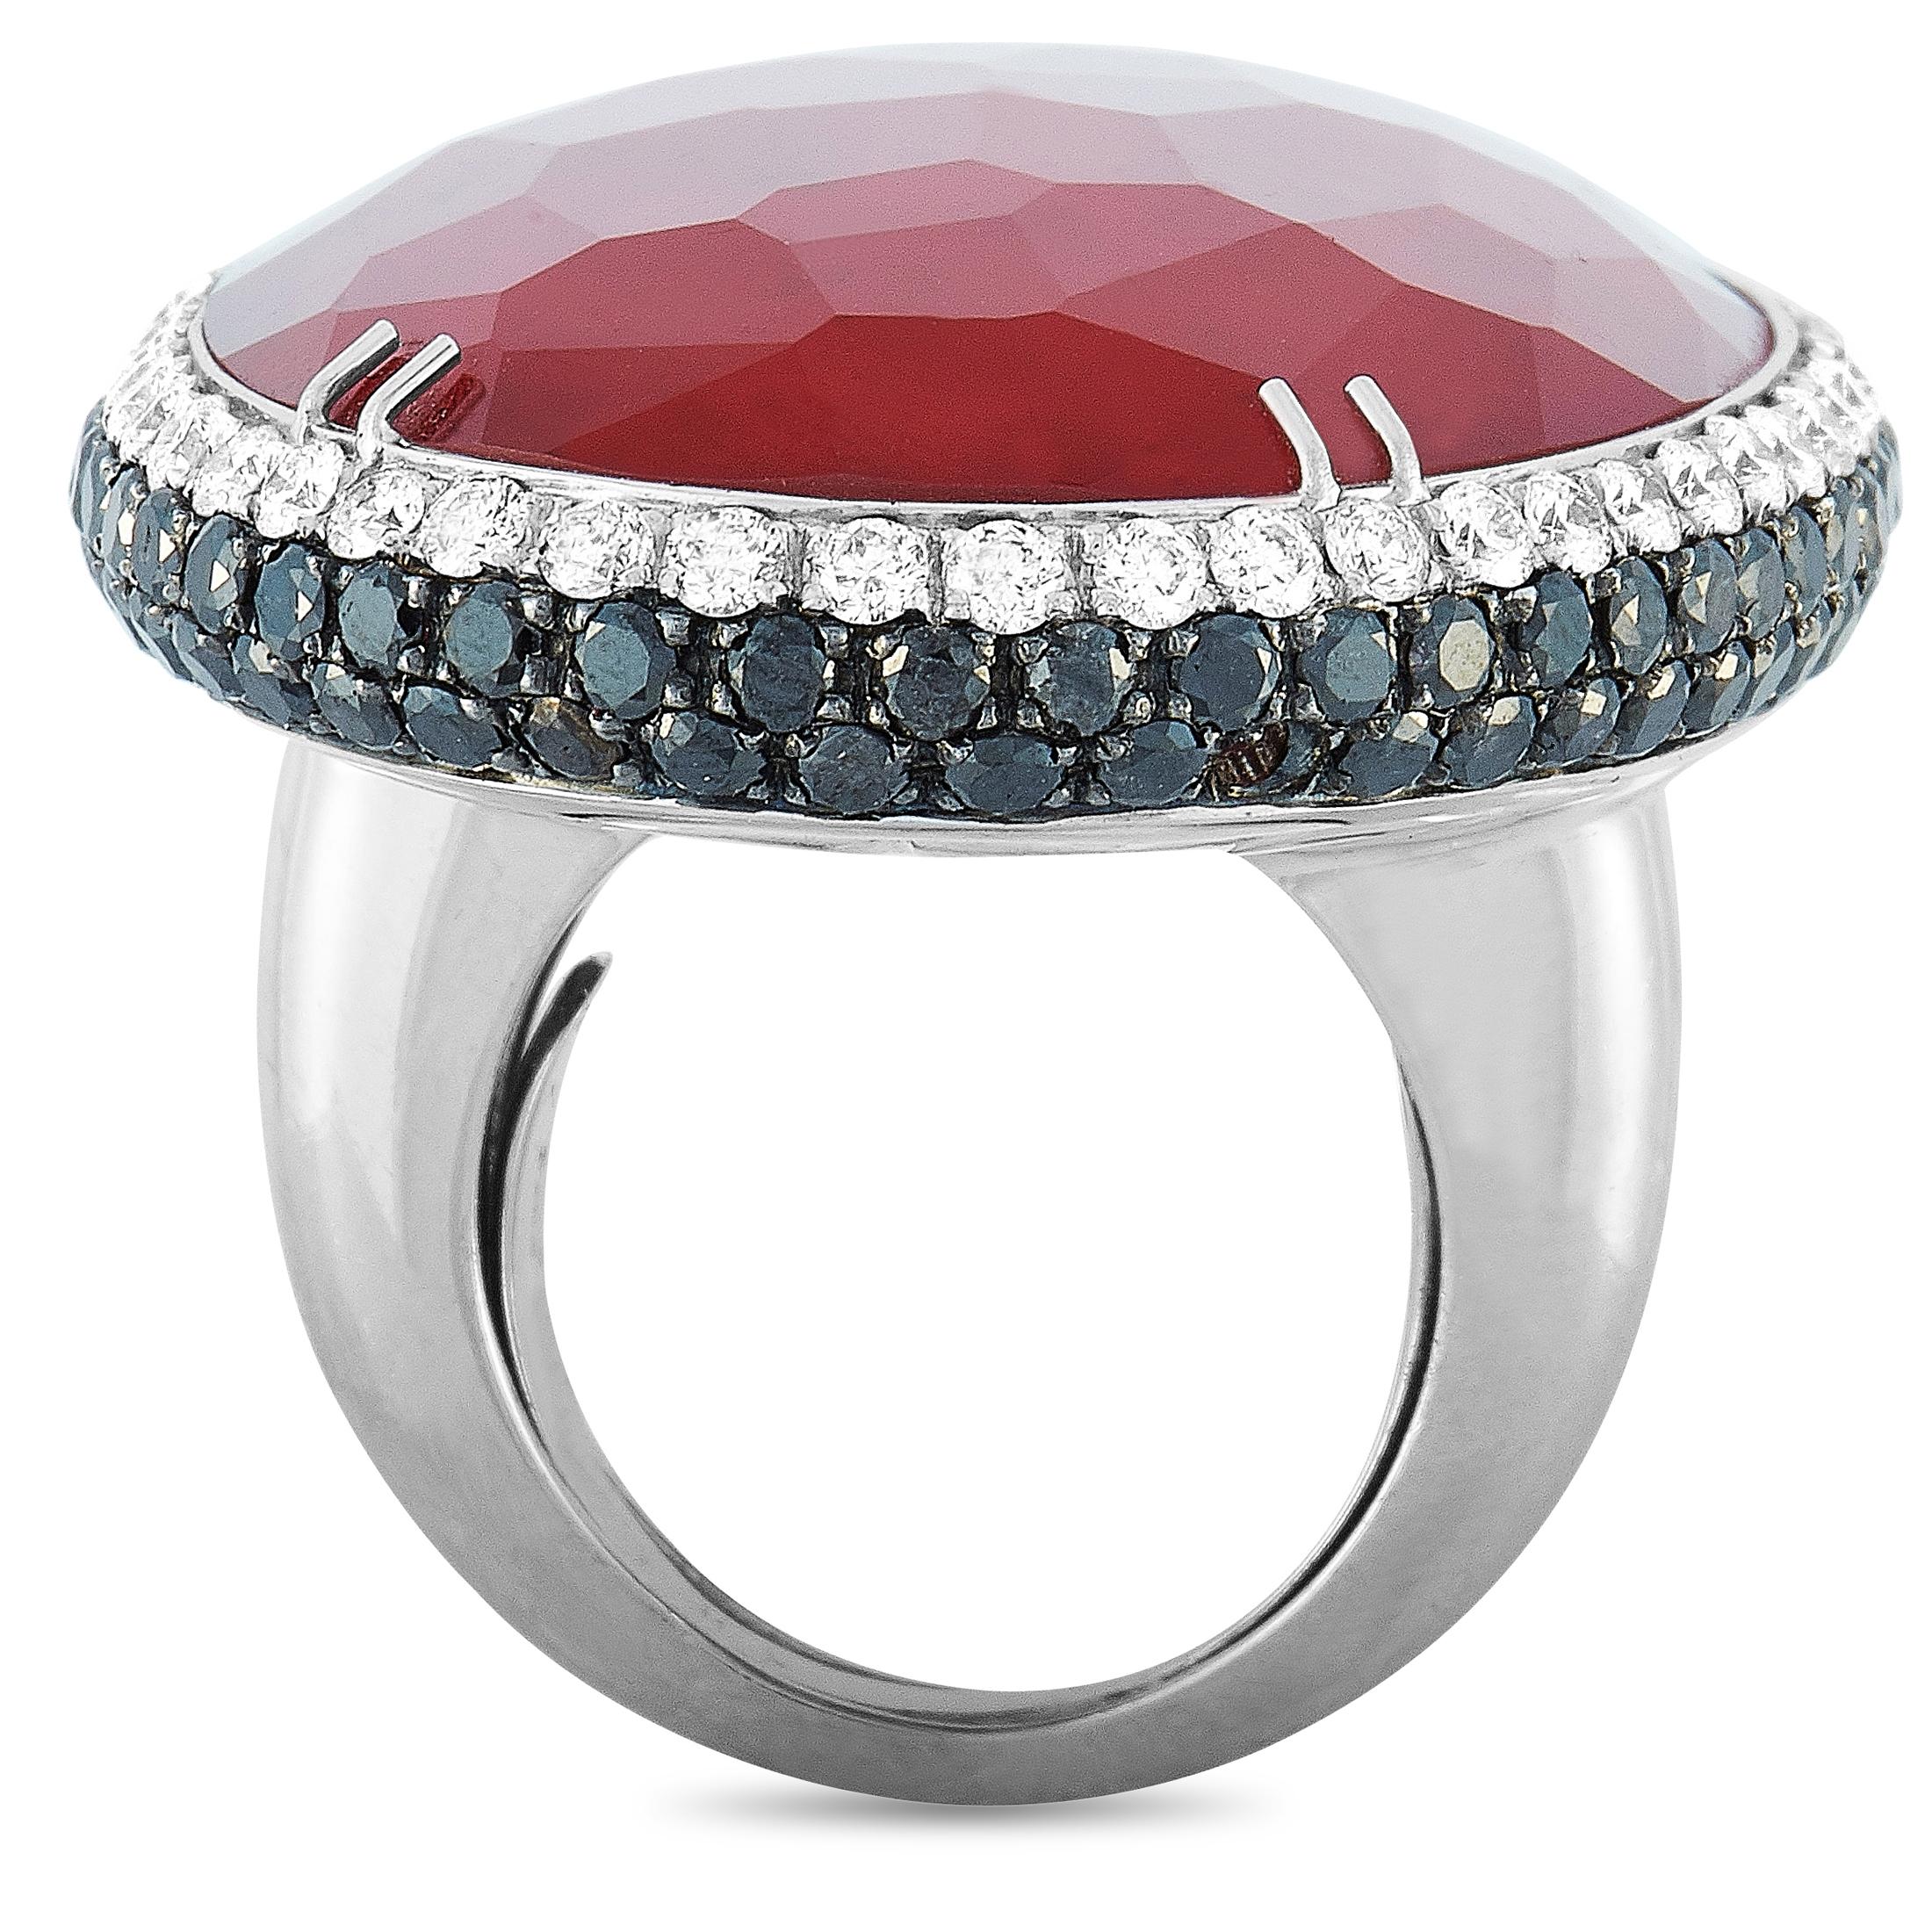 This Oro Trend ring is made of 18K white gold and weighs 39.3 grams, boasting band thickness of 4 mm and top height of 11 mm, while top dimensions measure 33 by 42 mm. The ring is embellished with a carnelian and with white and black diamonds that